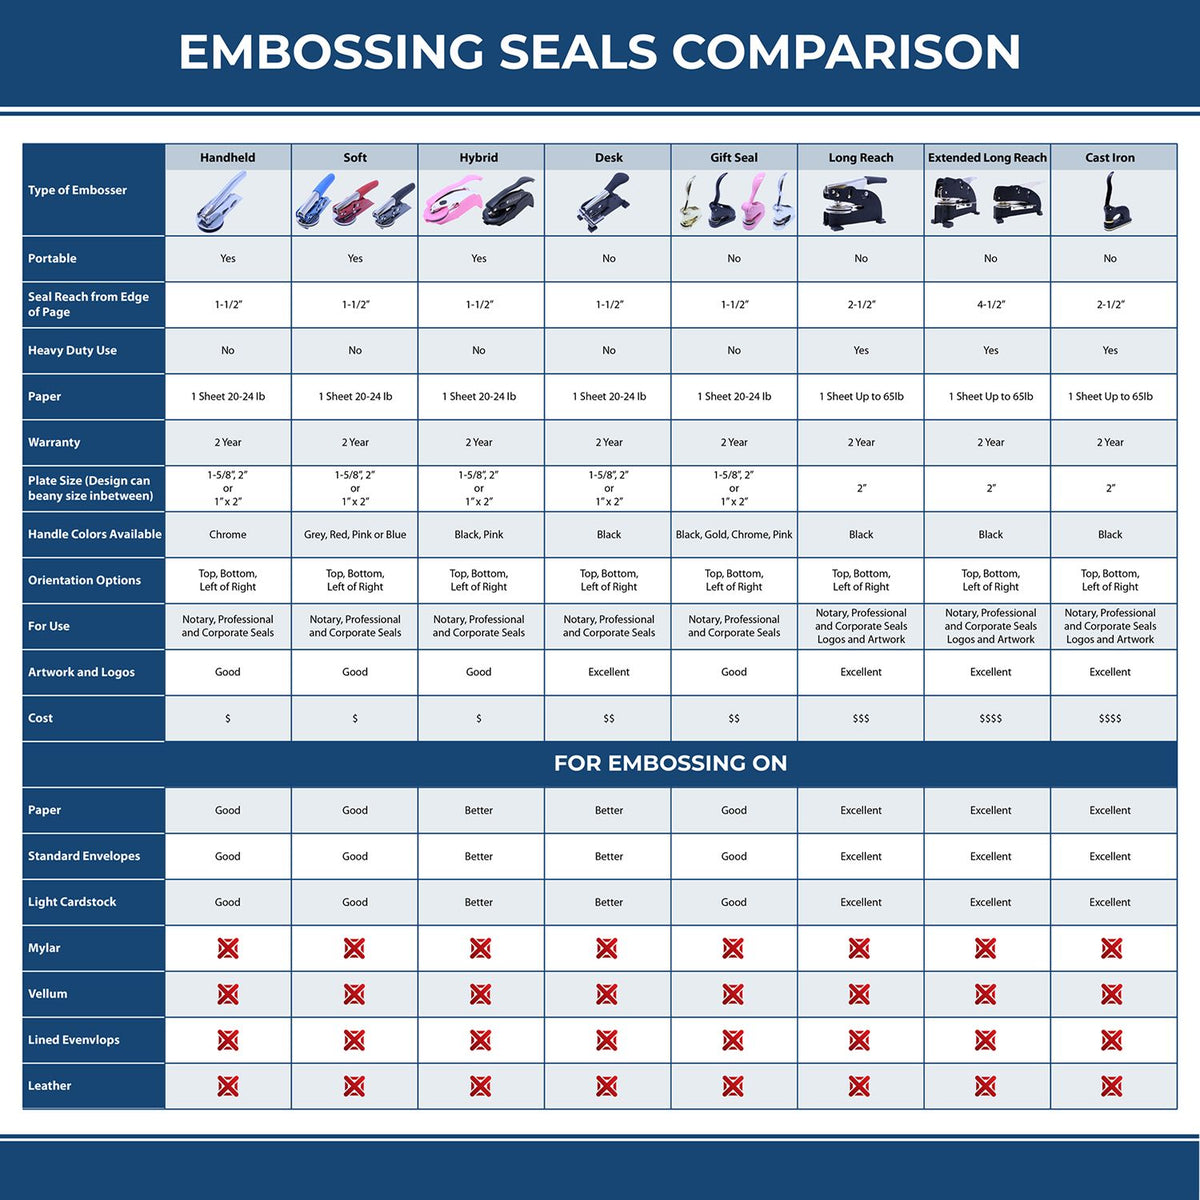 A comparison chart for the different types of mount models available for the Hybrid Texas Geologist Seal